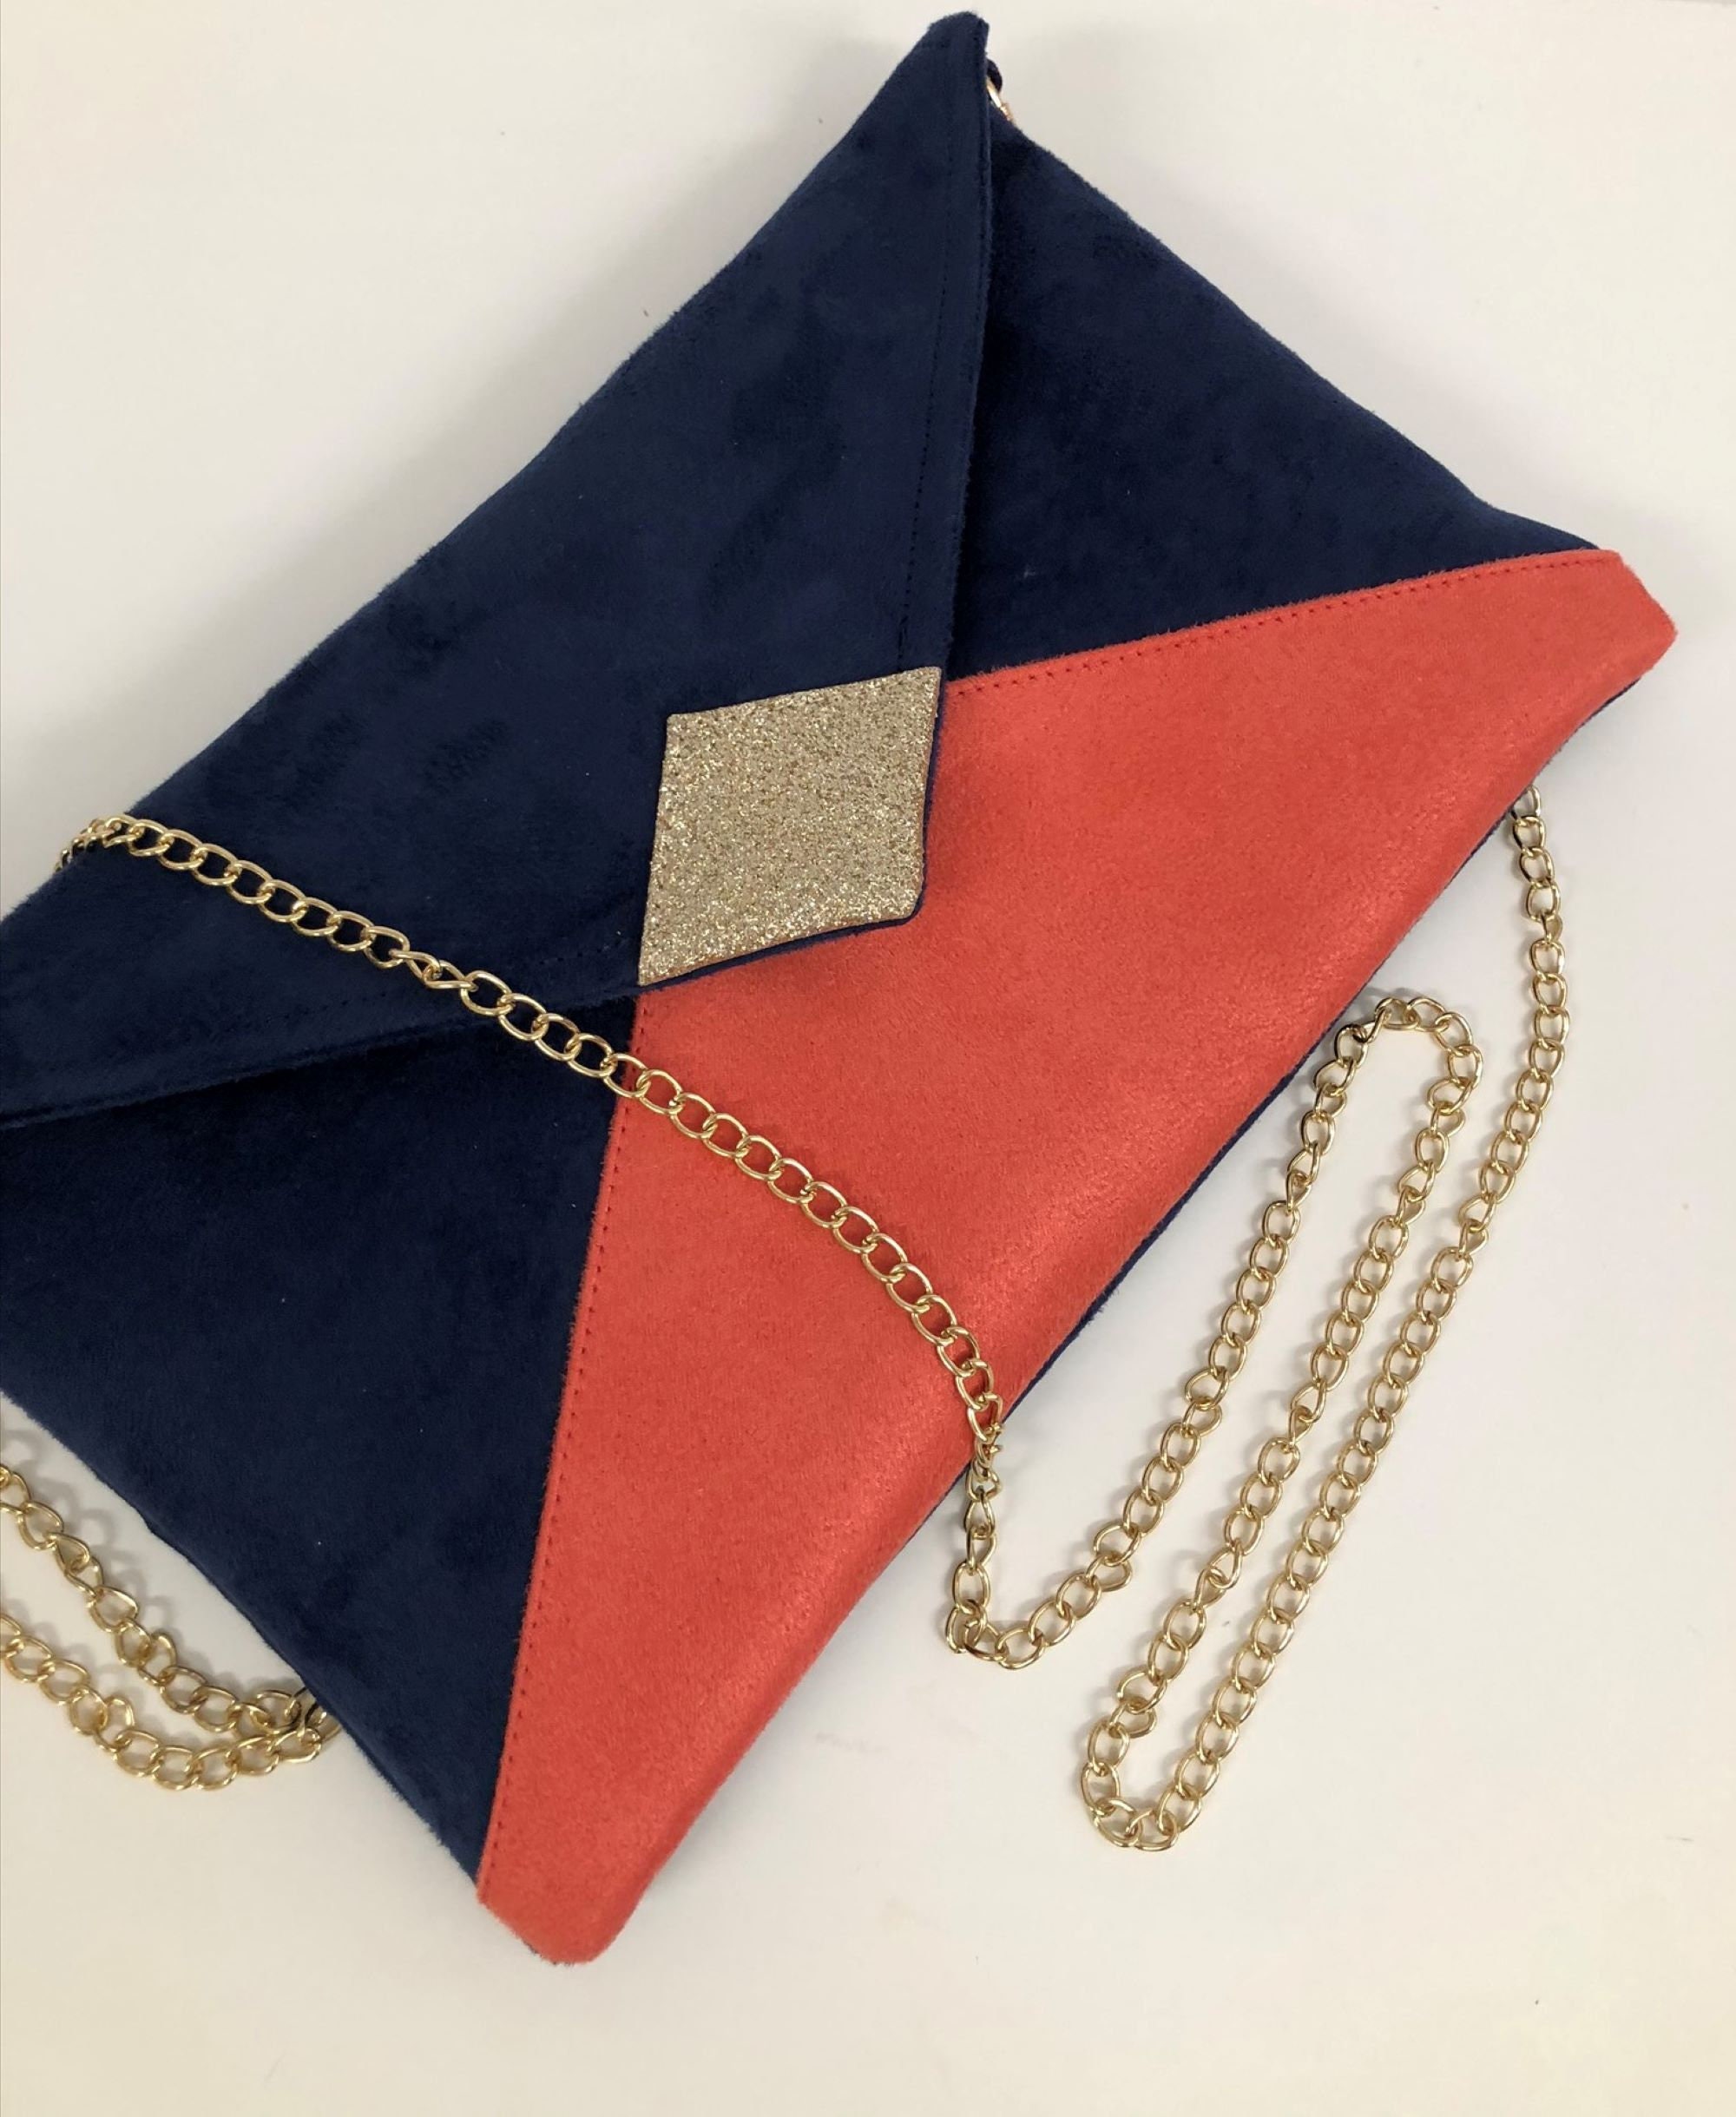 Navy Blue and Coral Wedding Clutch Bag With Gold Glitter / 